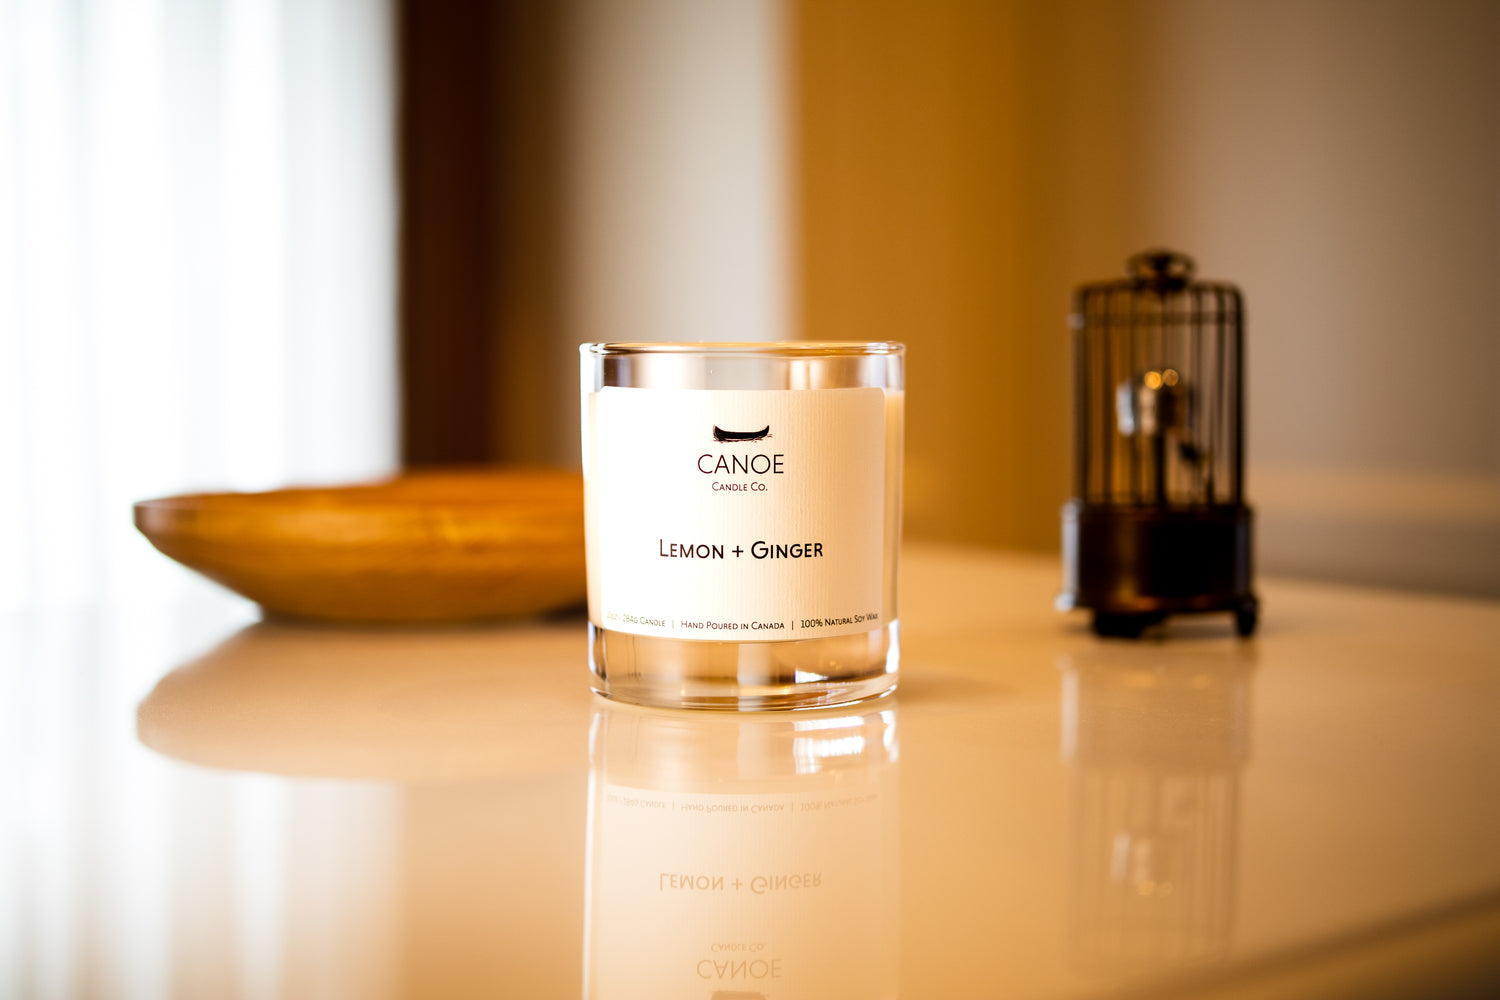 Canoe Candle Co.’s Lemon + Ginger 10oz soy wax candle on a white marble counter in front of a window and closet.